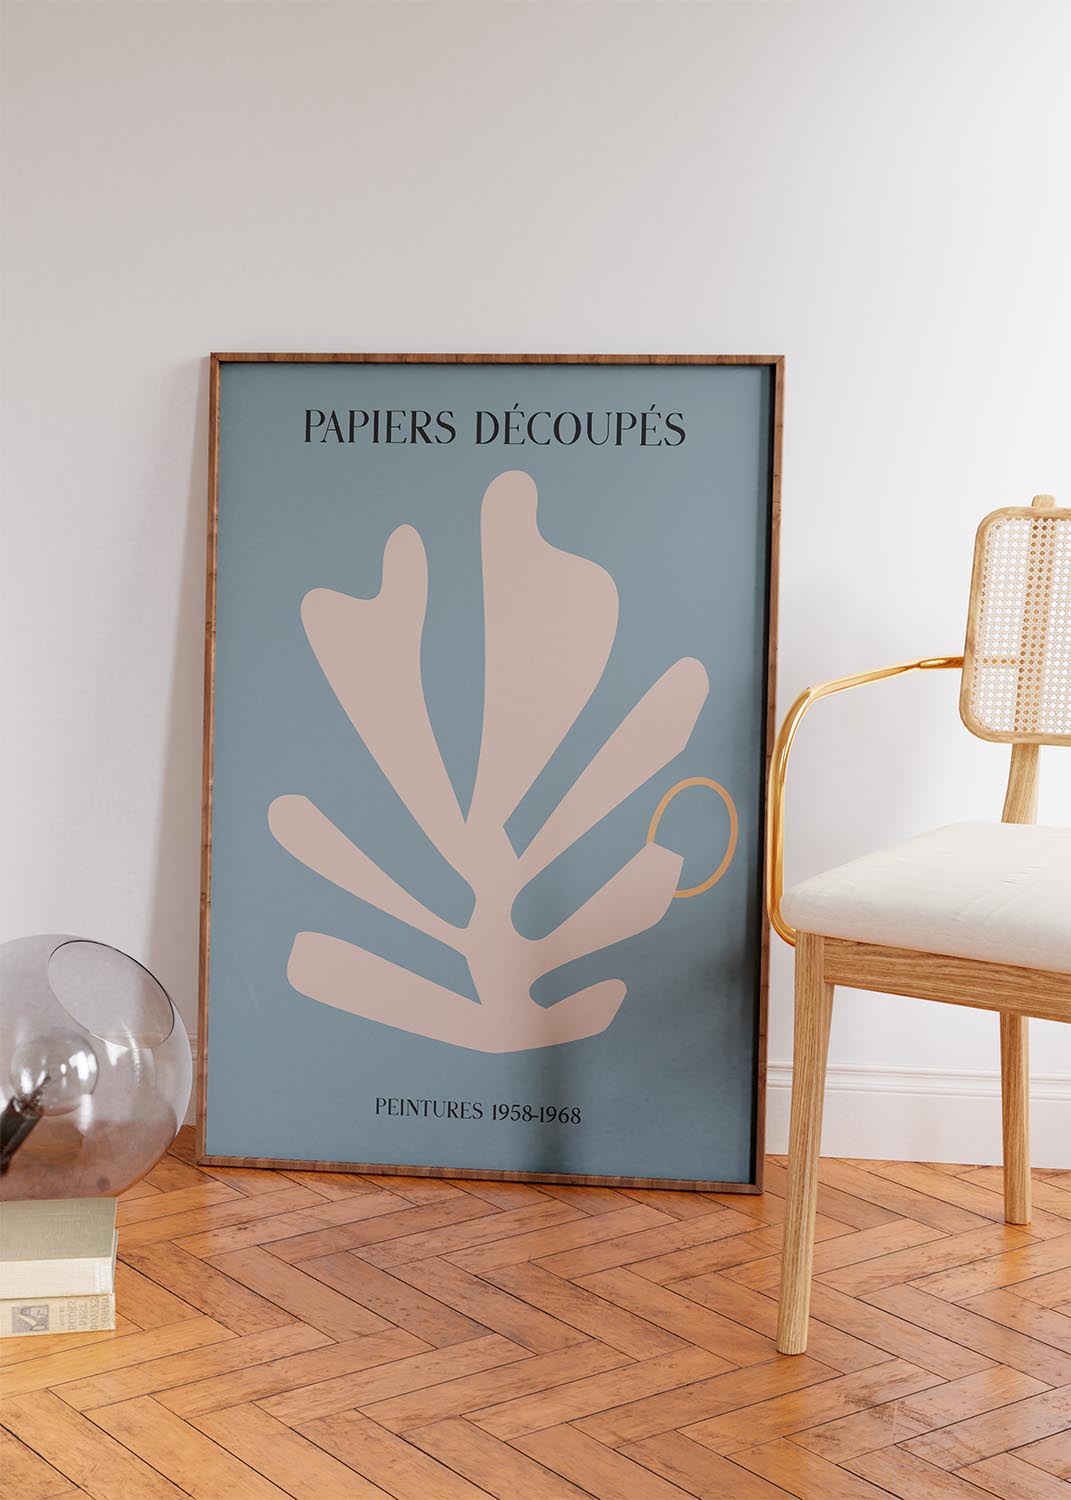 Art poster depicting Matisse-inspired 'Papiers Découpés – The Cut-Outs' in soft beige on a tranquil blue background, with 'PEINTURES 1958-1968' text, reflecting the serene and artistic nature of the work.